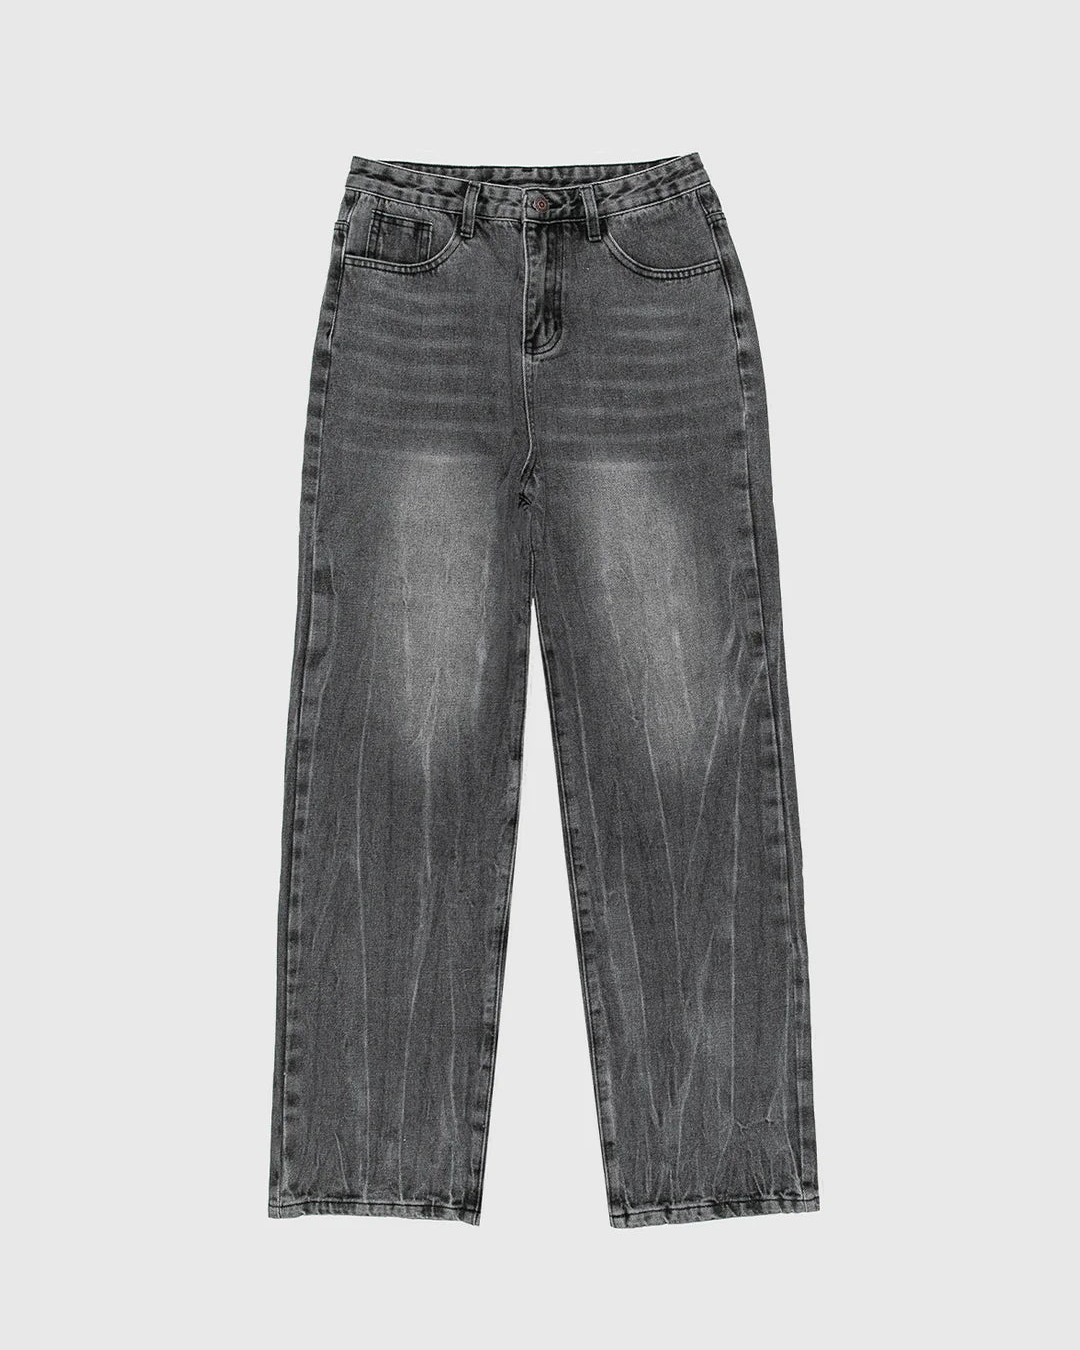 RELAXED WASHED DENIM PANTS